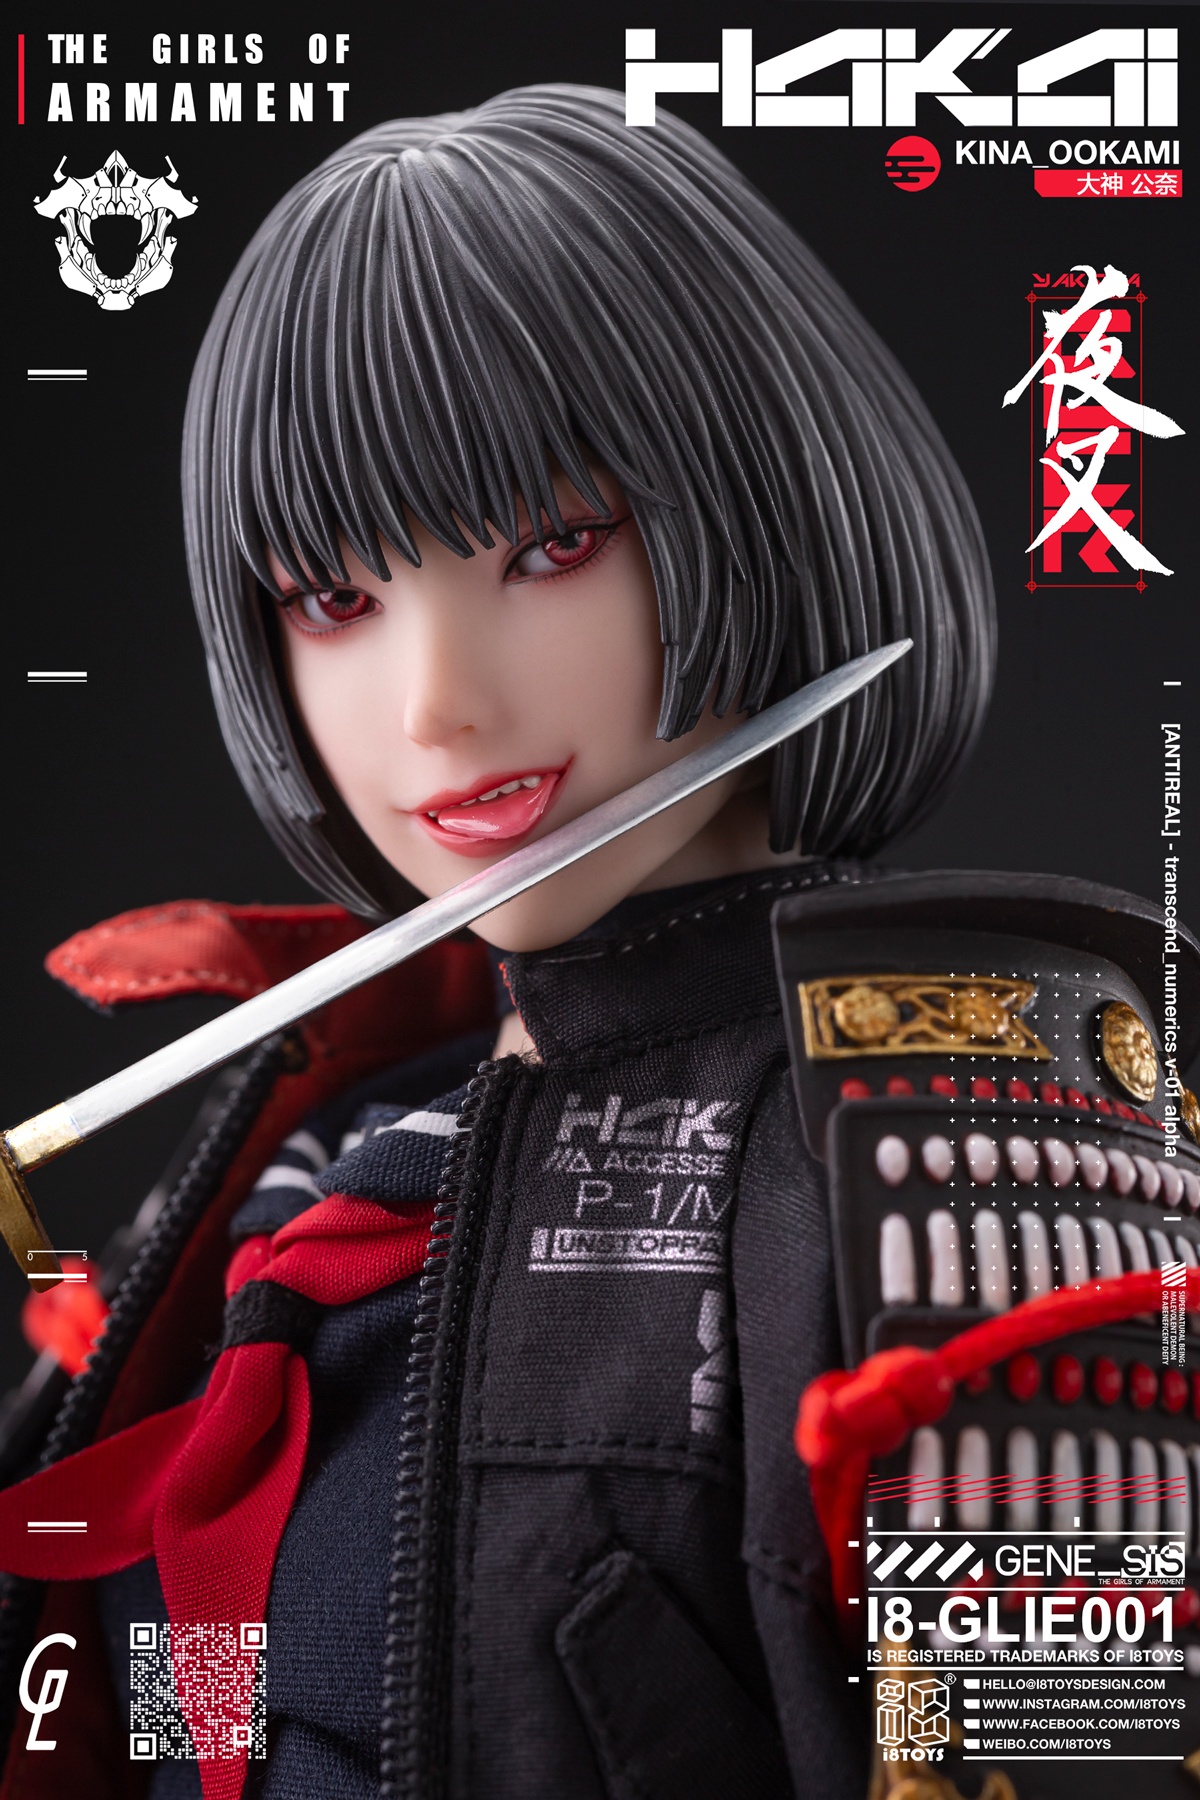 NEW PRODUCT: i8toys x Gharliera: The Girls of Armament first episode "Yaksha" 0835